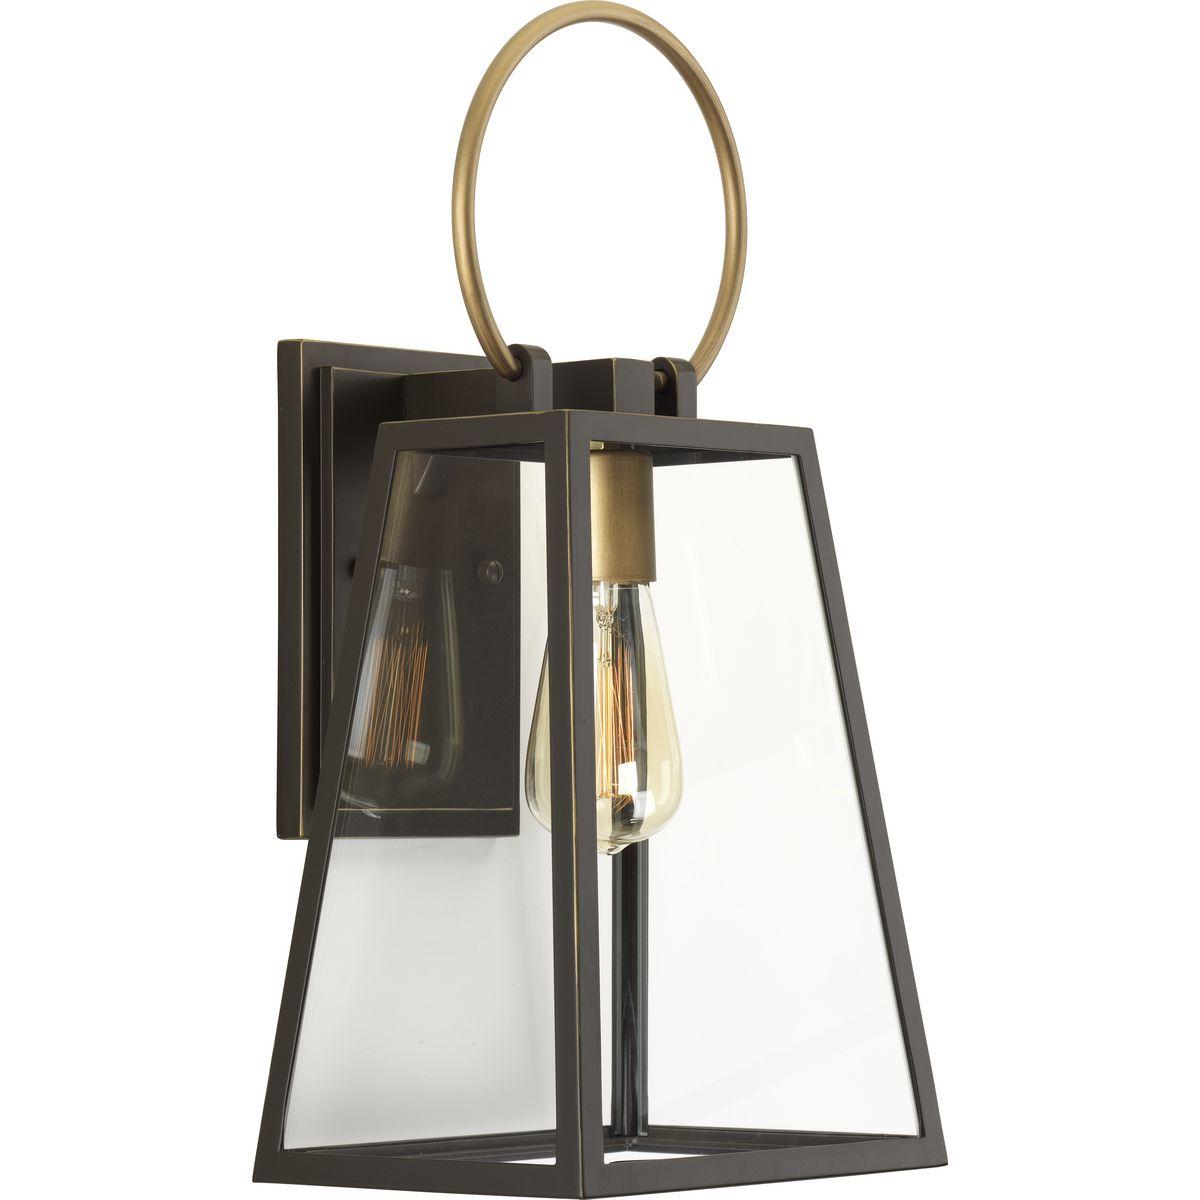 Hubbell P560078-020 Barnett lanterns deliver timeless appeal with a decidedly modern flair. Large clear panes of glass frame your choice of traditional or vintage style bulbs. A graphic-inspired overscaled loop features a contrasting brass-tone finish. One-Light Medium Wall 